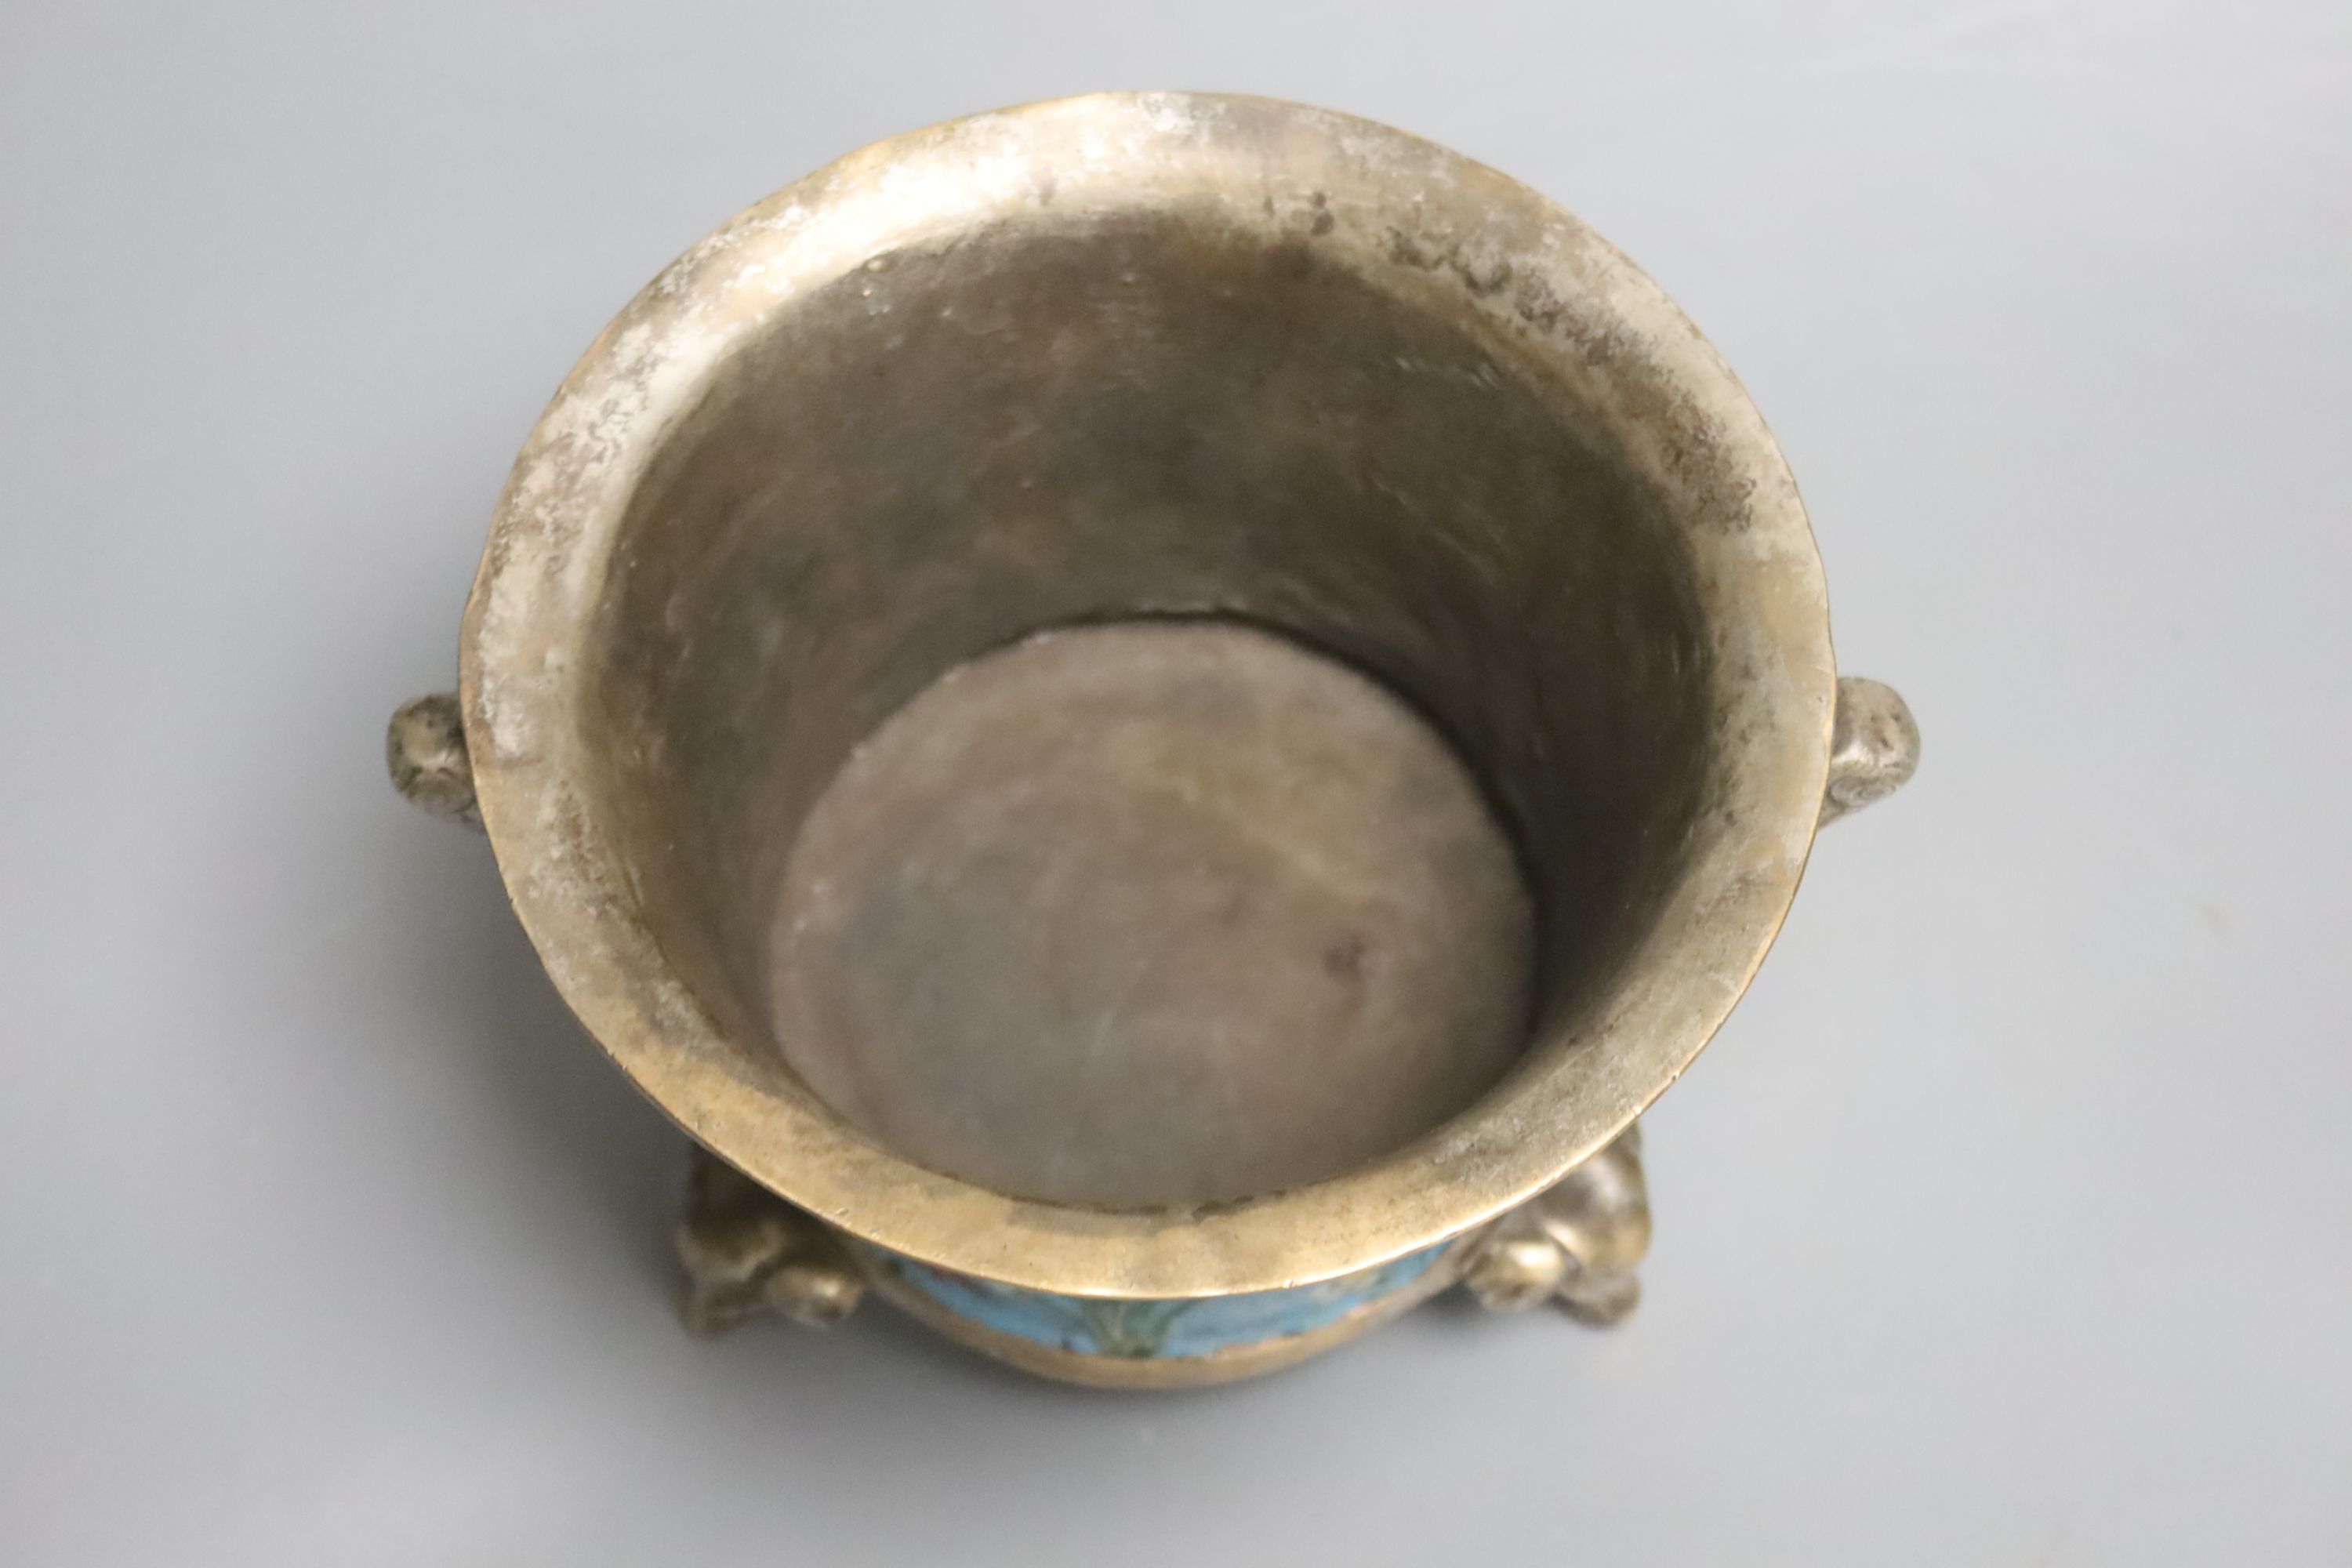 A heavy Chinese silvered bronze twin handled censer with floral decoration, a four character Xuande mark, diameter 14cm 12cm high